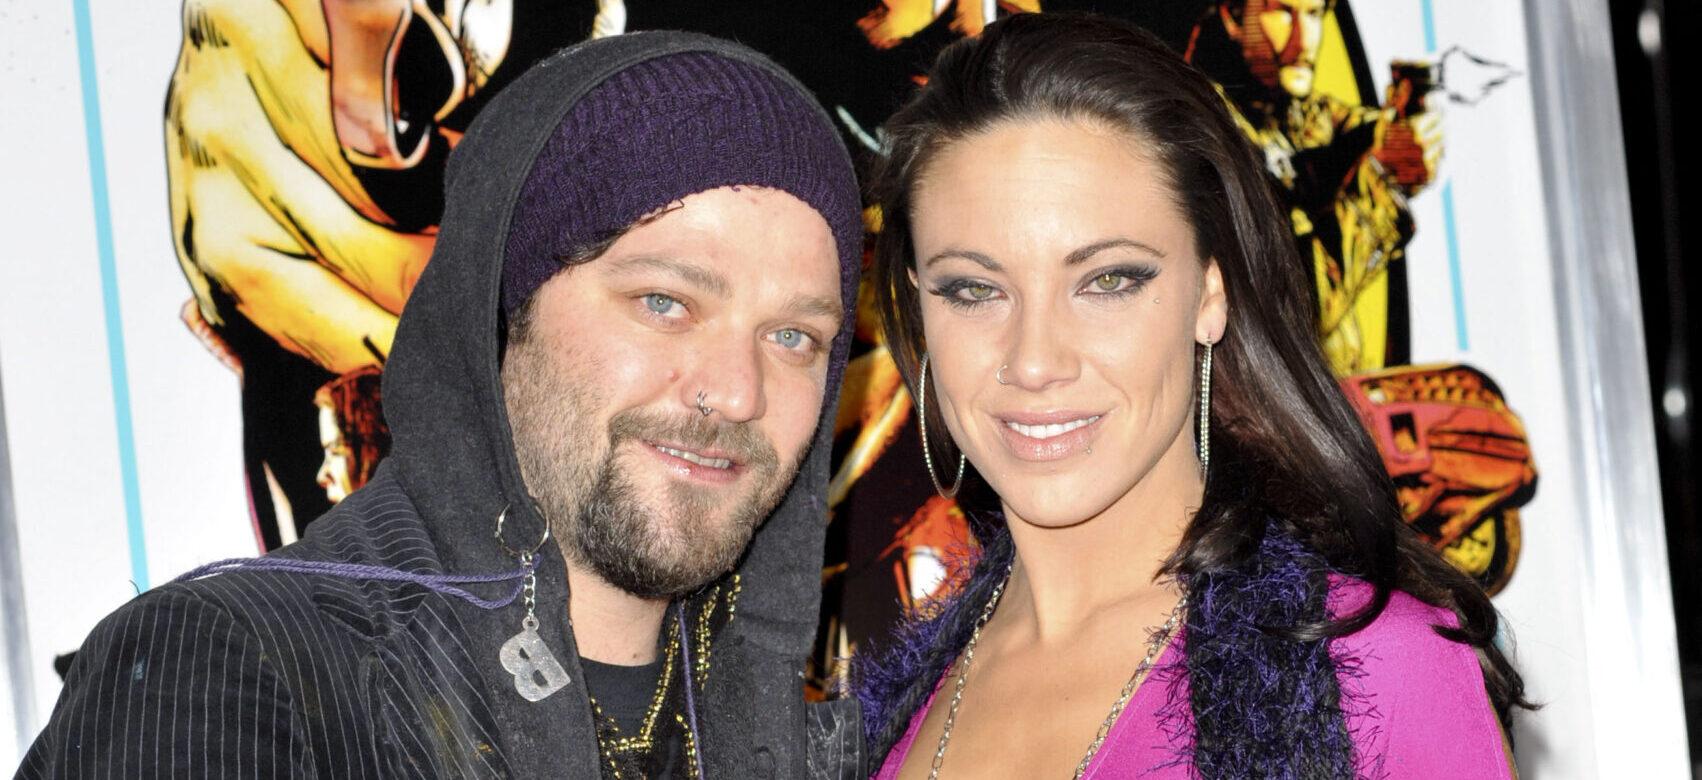 ‘Jack—‘ Star Bam Margera Is Back To Skateboarding After 1-Month of Sobriety